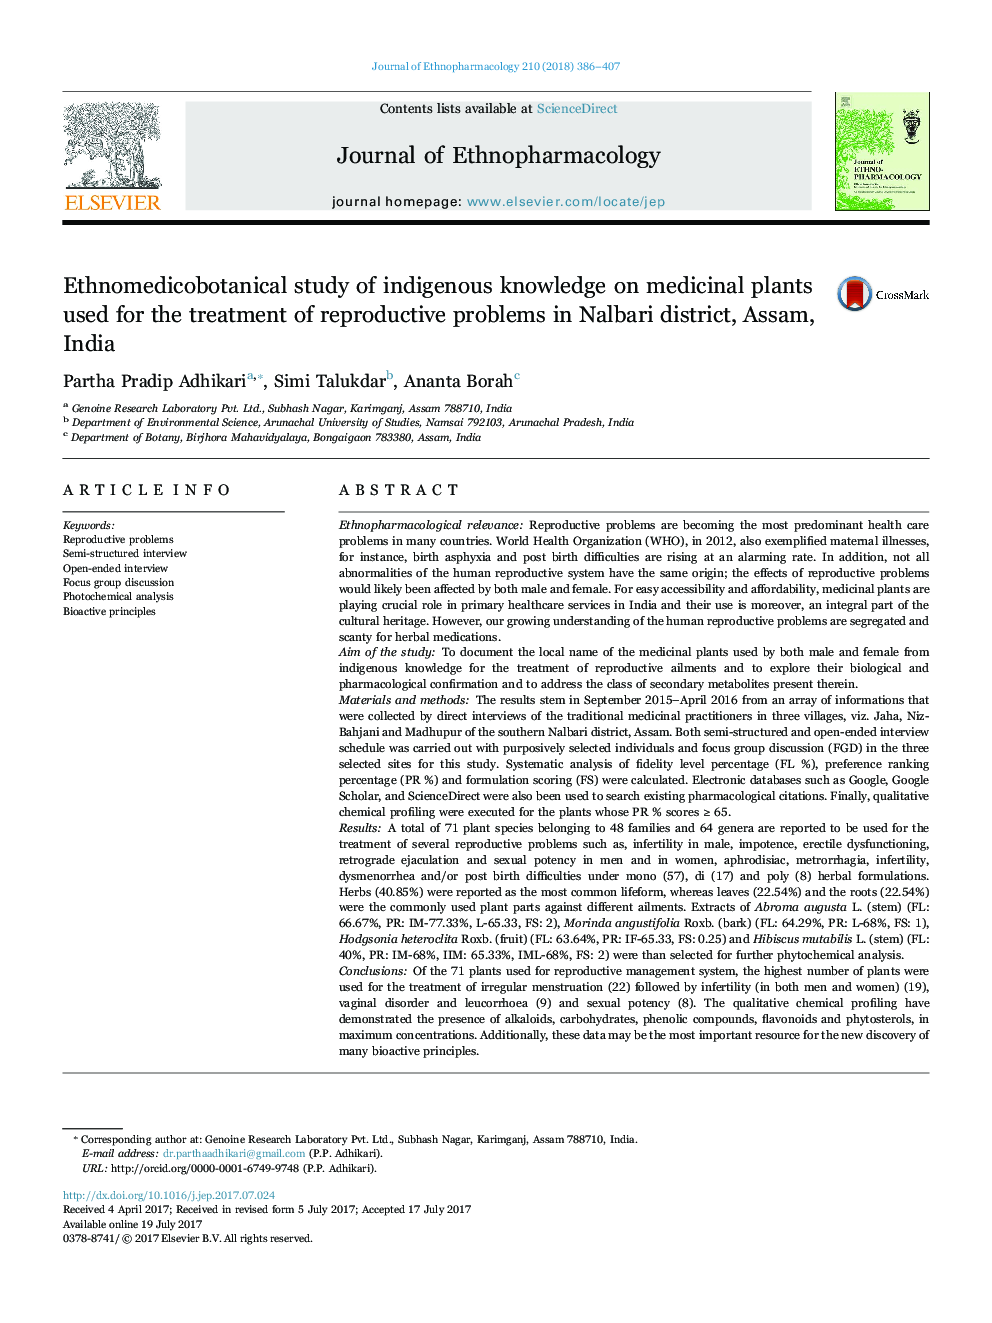 Ethnomedicobotanical study of indigenous knowledge on medicinal plants used for the treatment of reproductive problems in Nalbari district, Assam, India